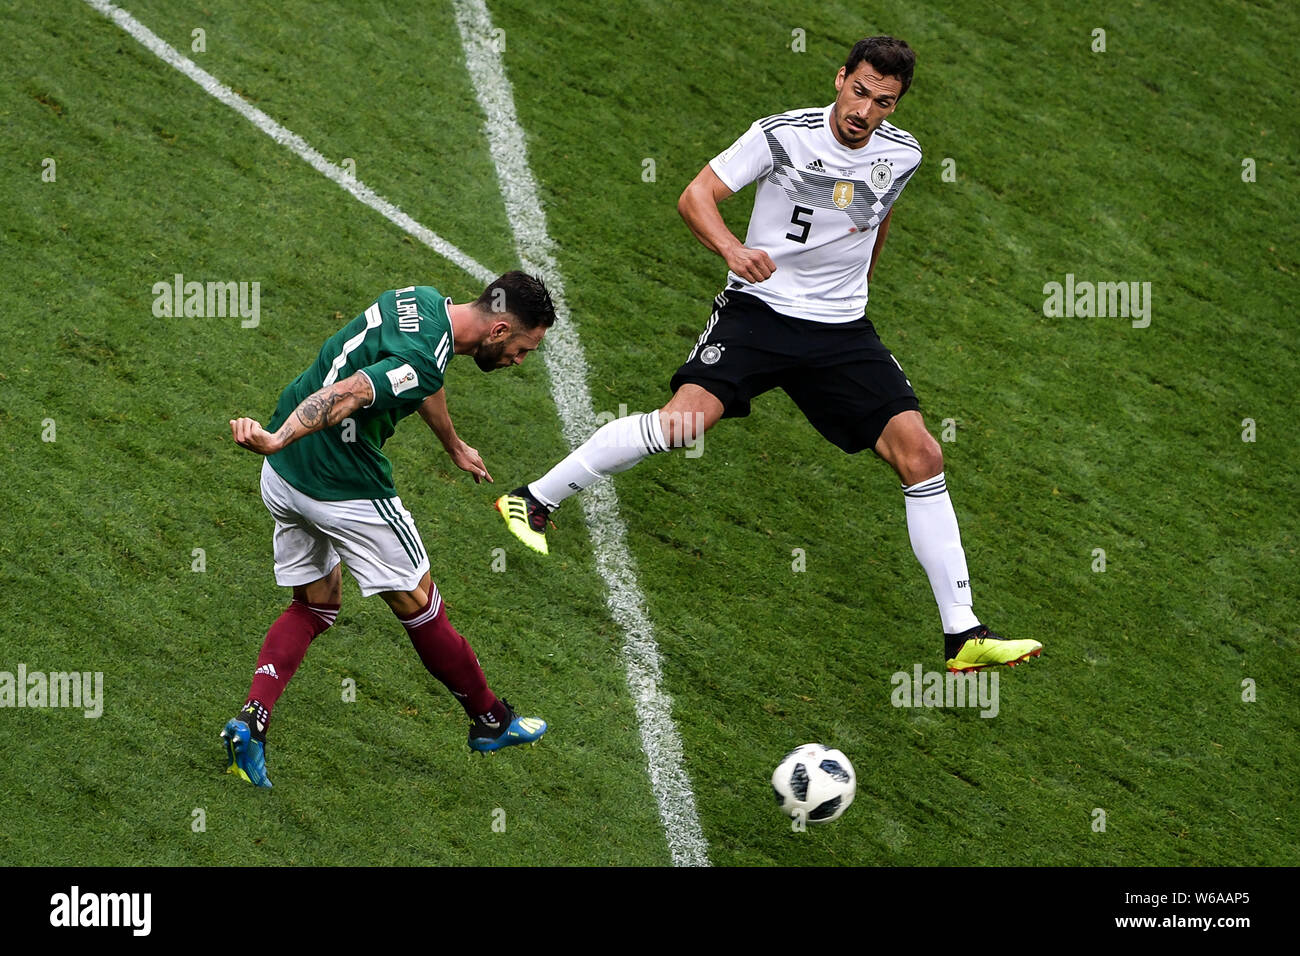 Mats Hummels of Germany, right, tries to block a shot by Miguel Layun of Mexico in their Group F match during the FIFA World Cup 2018 in Moscow, Russi Stock Photo